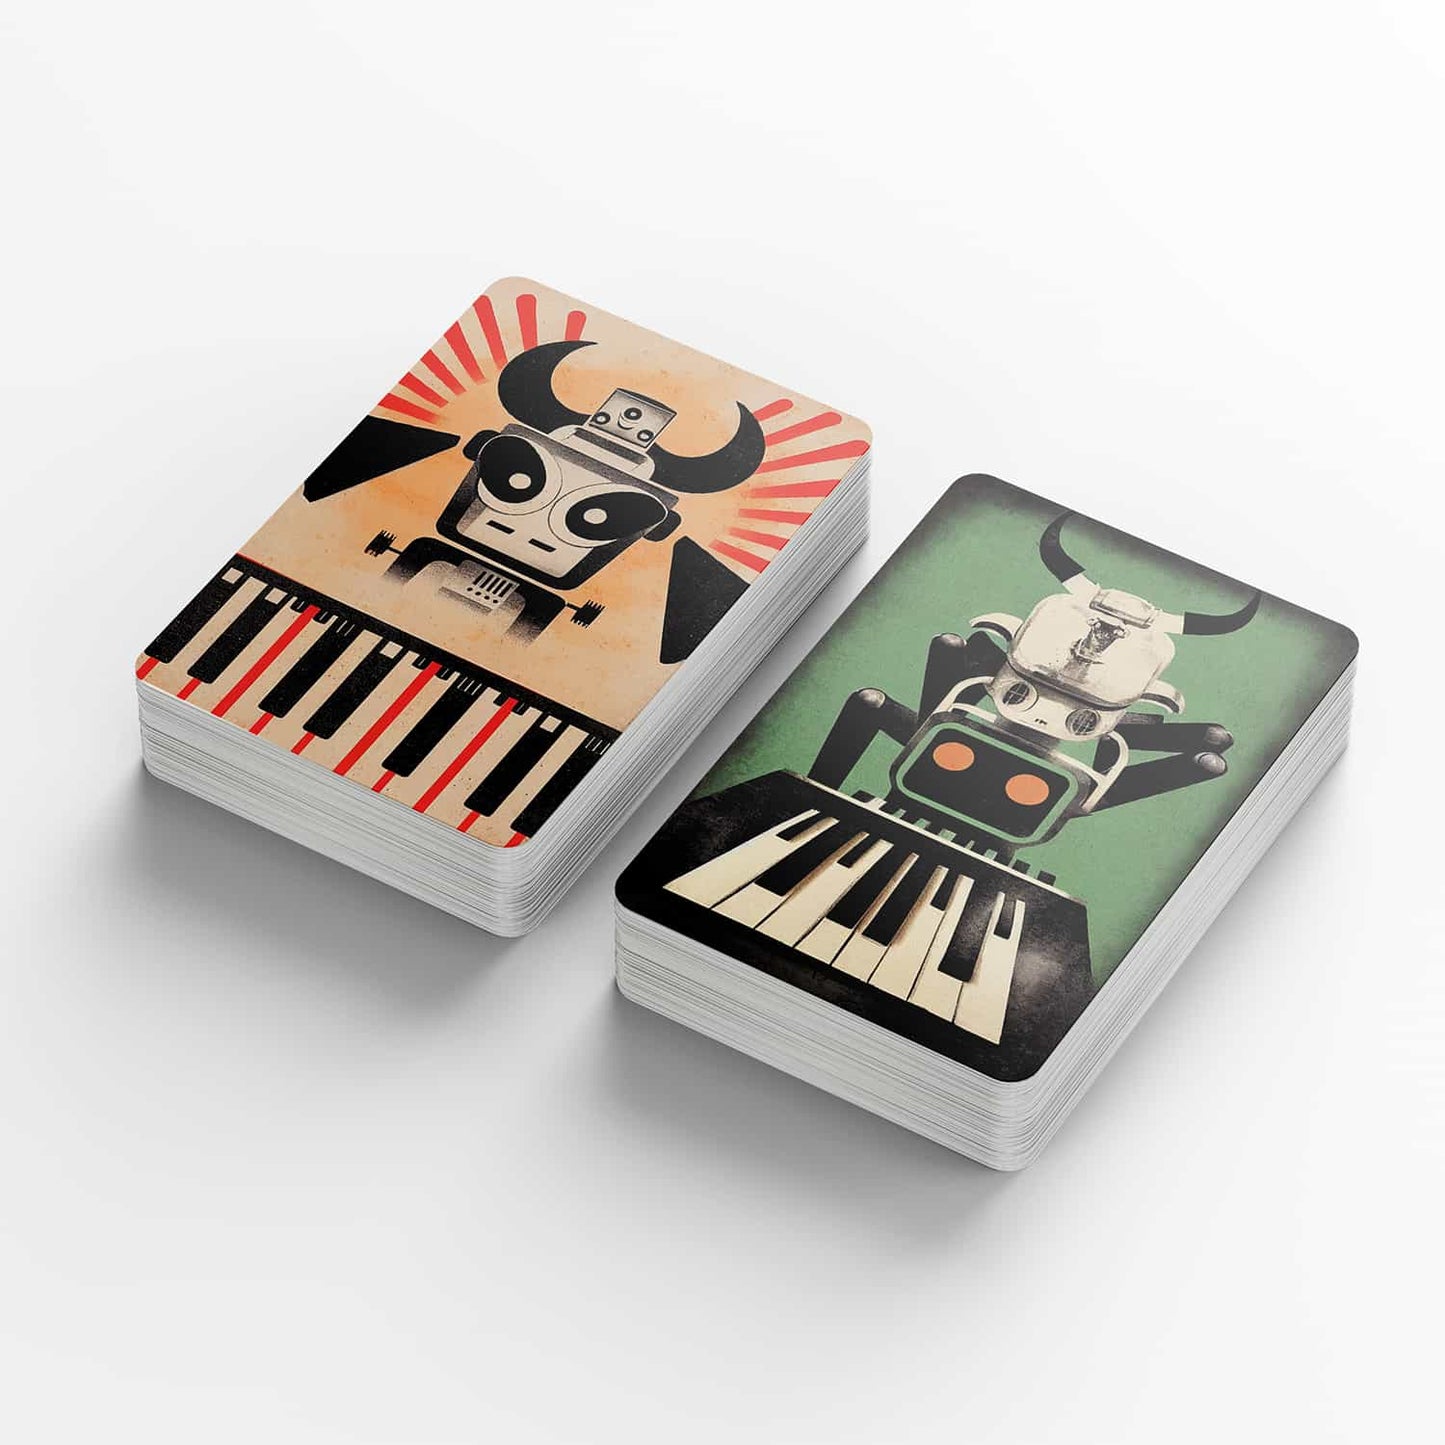 Three Cats Series One: More Signal Less Bull$#!+ Card Deck for Musicians